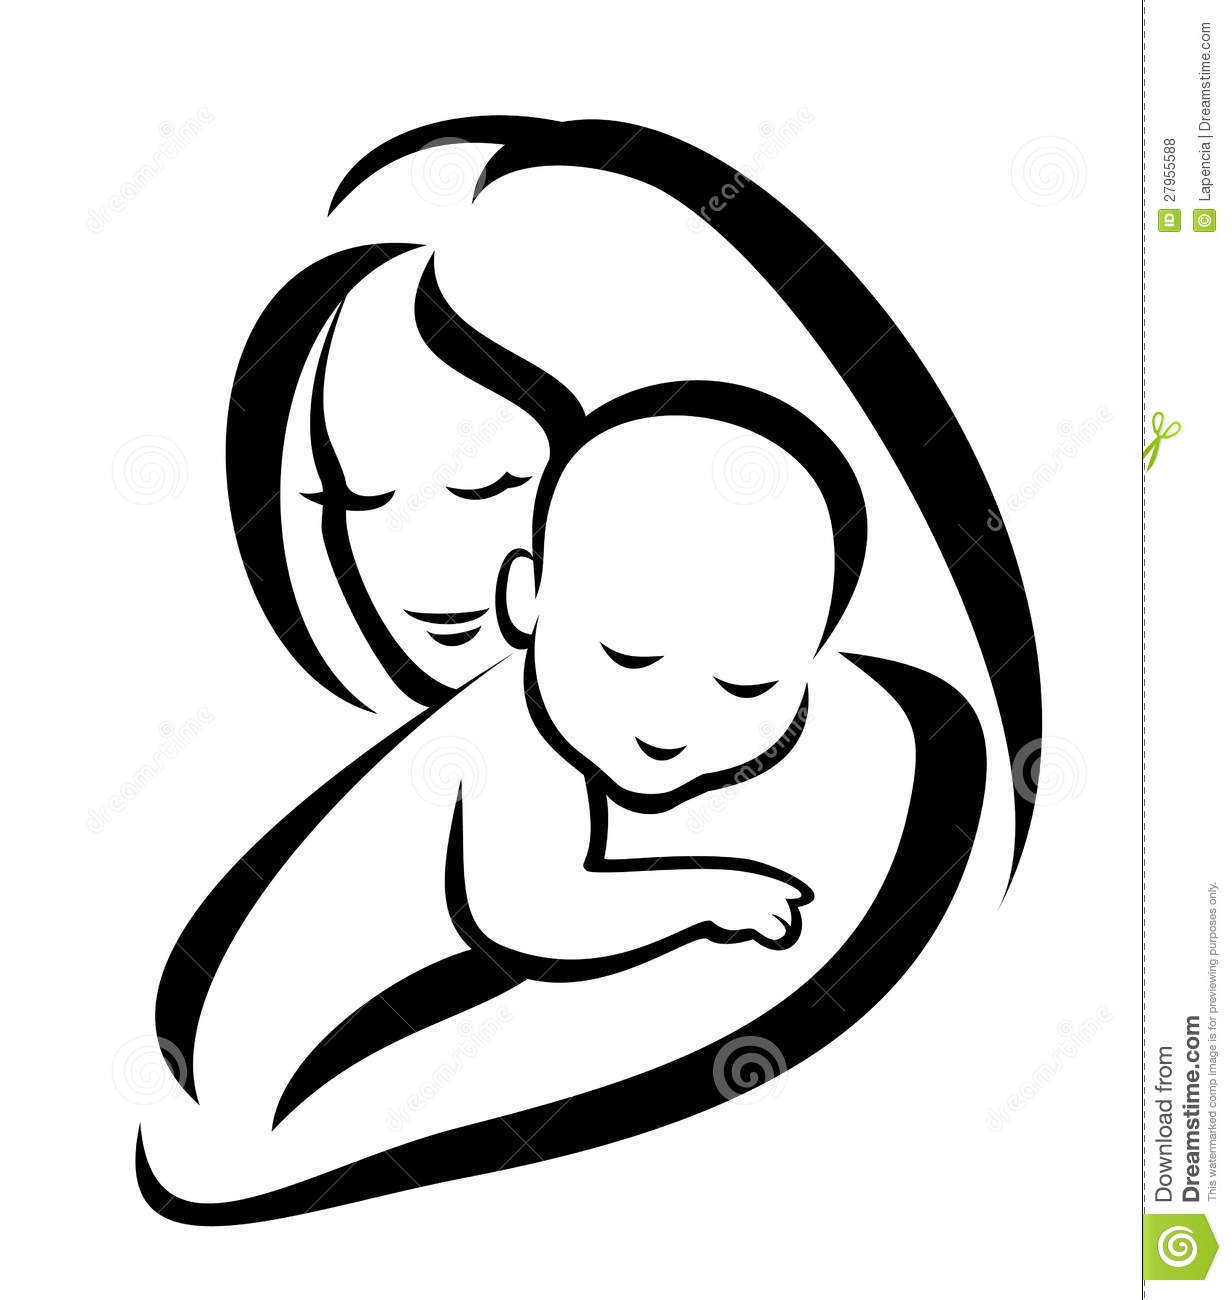 ... mother and baby symbol, h